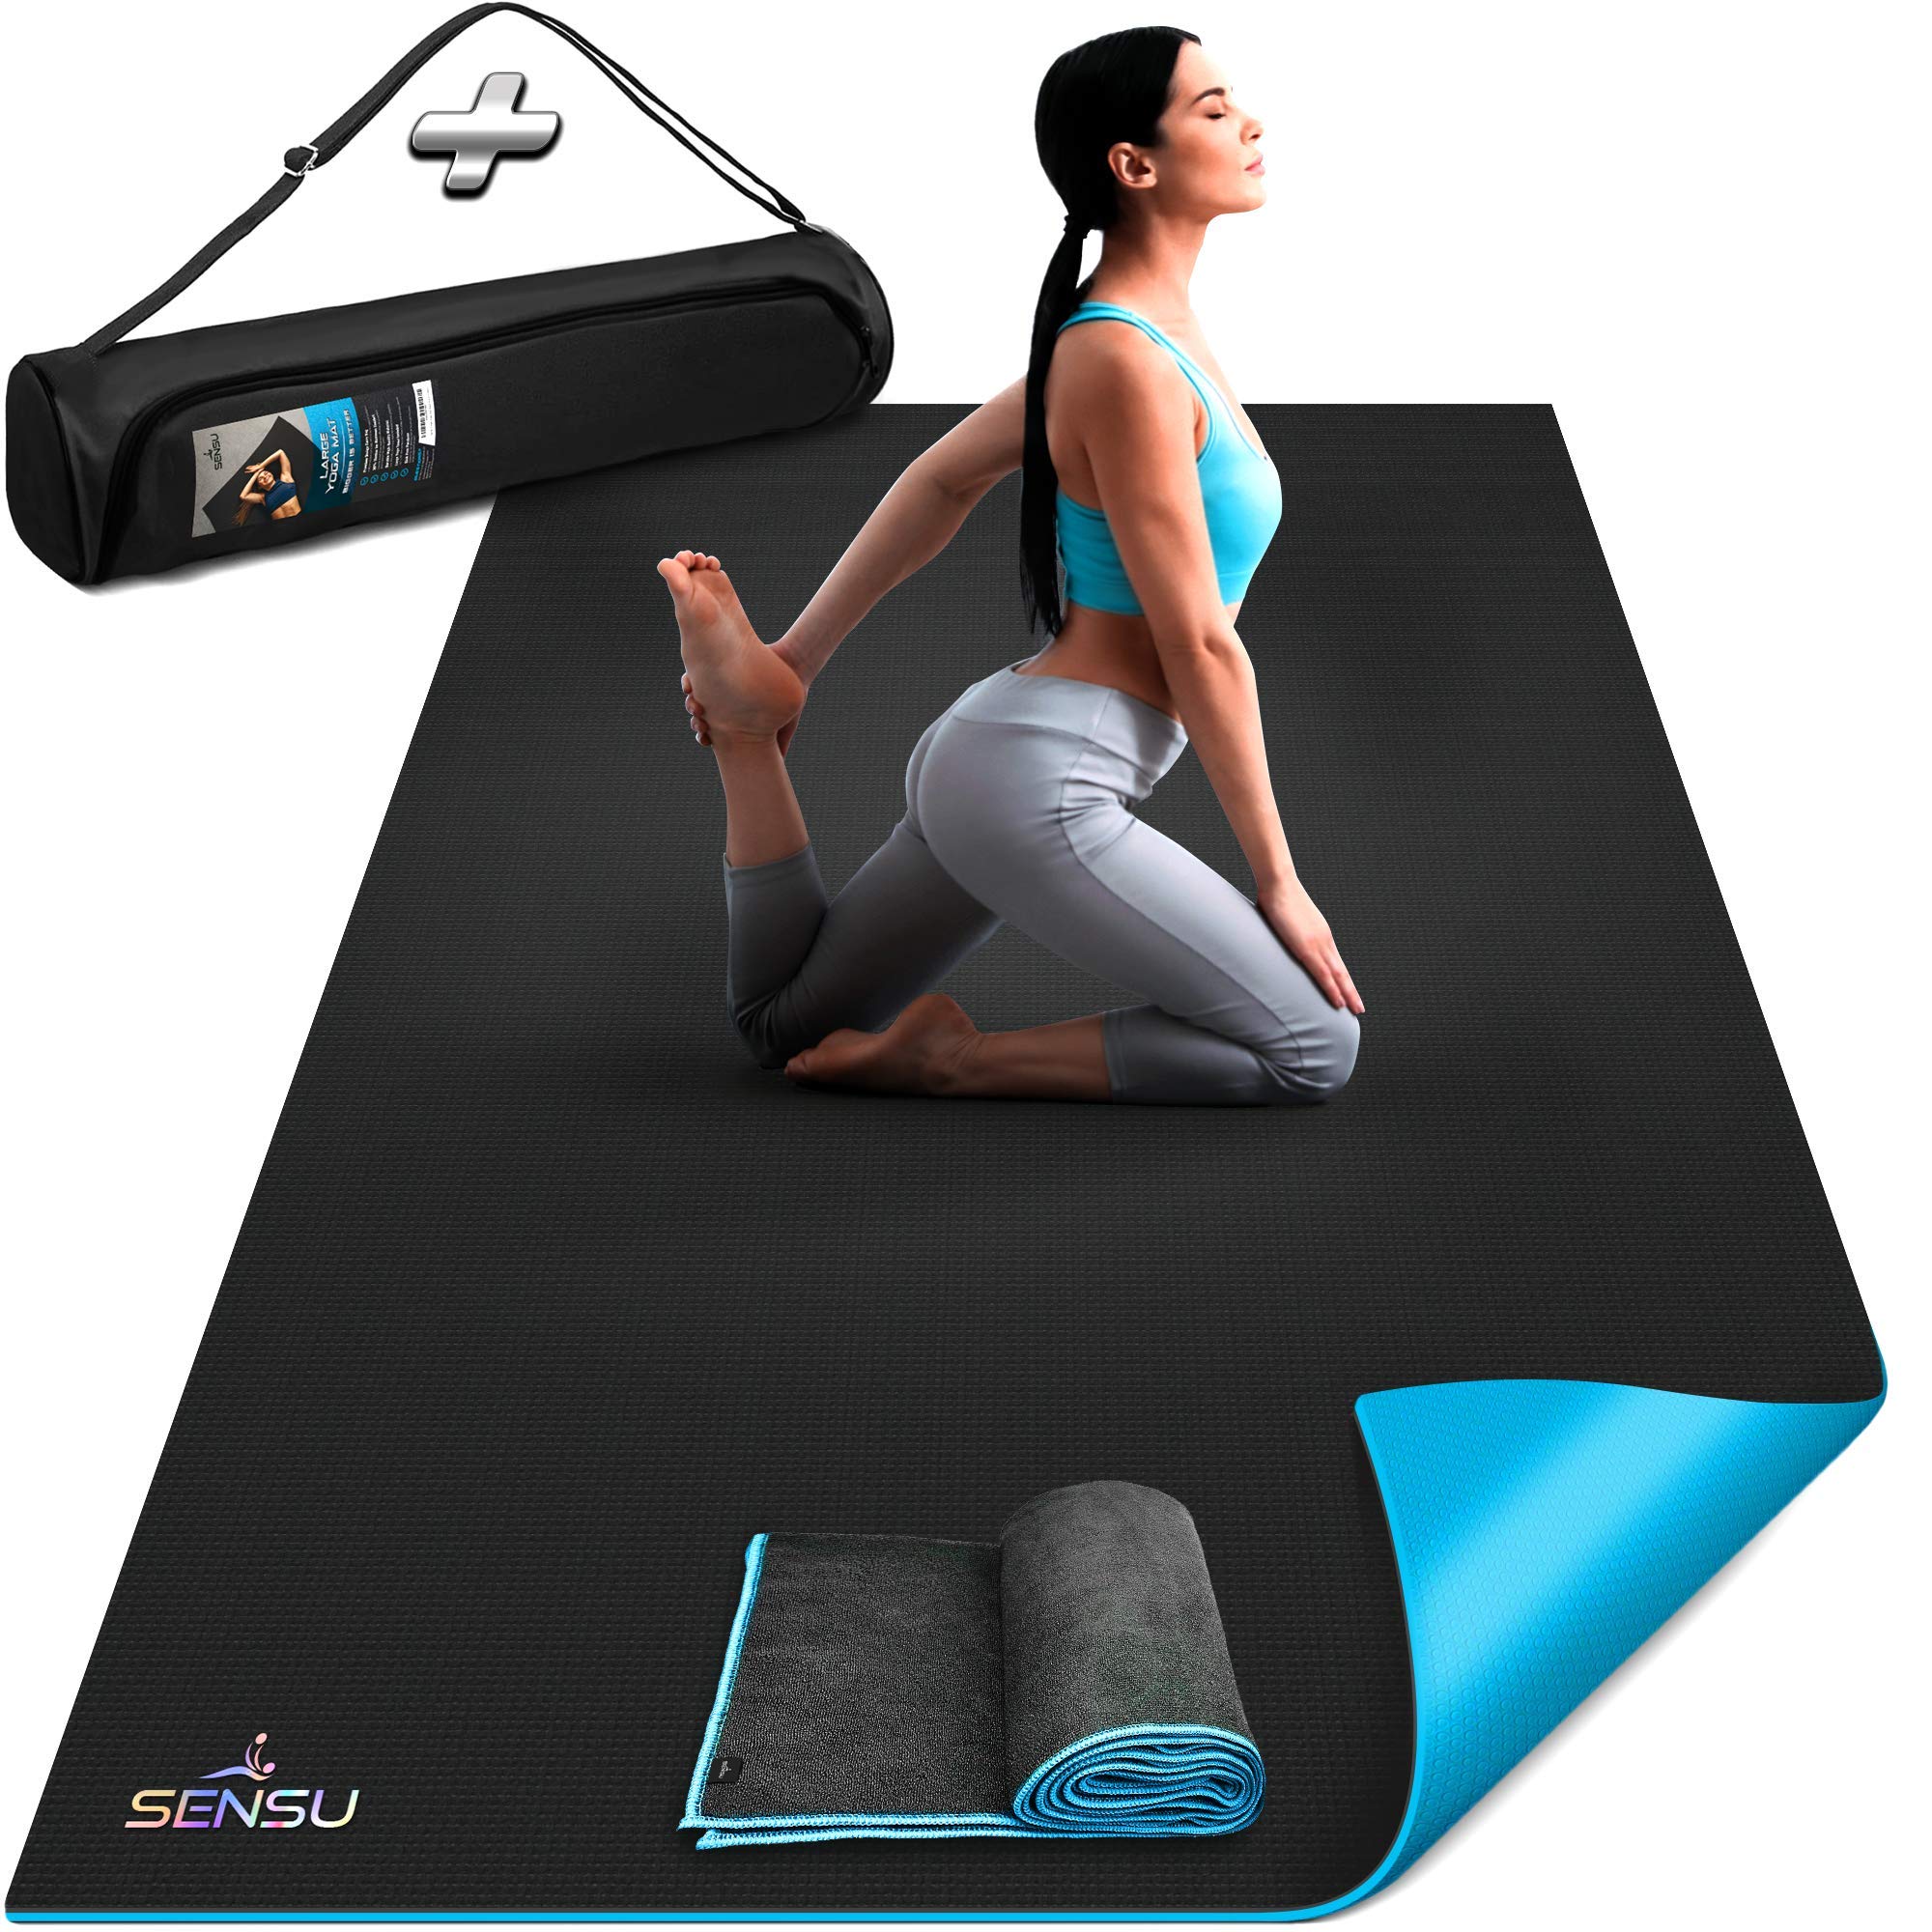 Sensu Large Yoga Mat - 6 x 4 x 9mm Extra Thick Exercise Mat for Yoga Pilates Stretching Cardio Home Gym Floor Non-